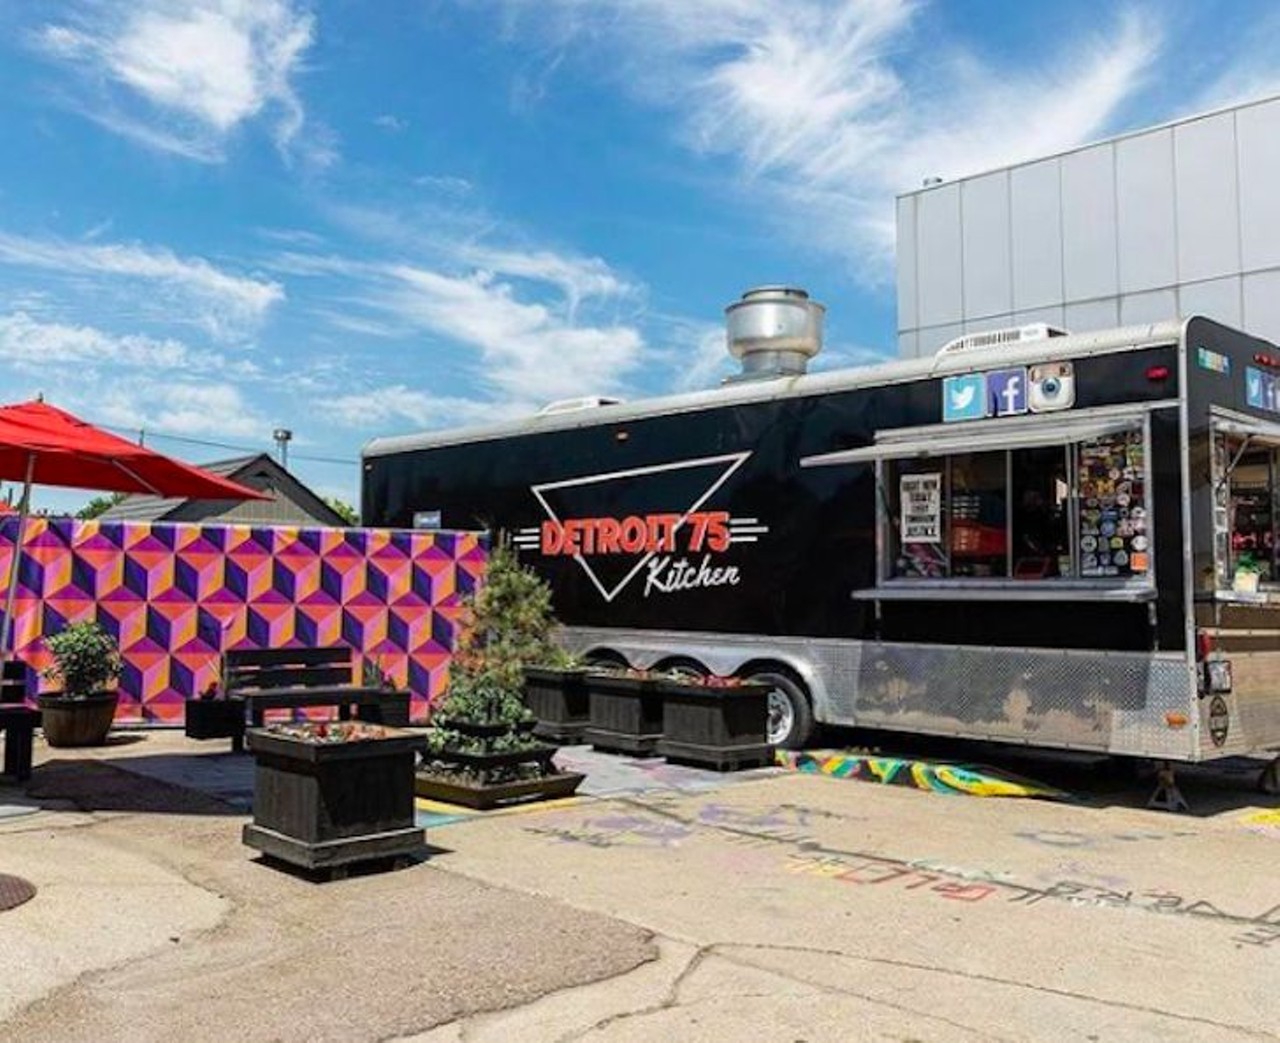 Detroit 75 Kitchen
detroit75kitchen.com
Detroit 75 takes everything you knew about a sandwich and elevates it with a dash of Detroit. With names like the Fisher Fwy. Fish , I-75 Chicken Shawarma, and Russell St. Veggie, you can eat your way through Detroit at this truck.
Photo via Detroit 75 Kitchen/Instagram